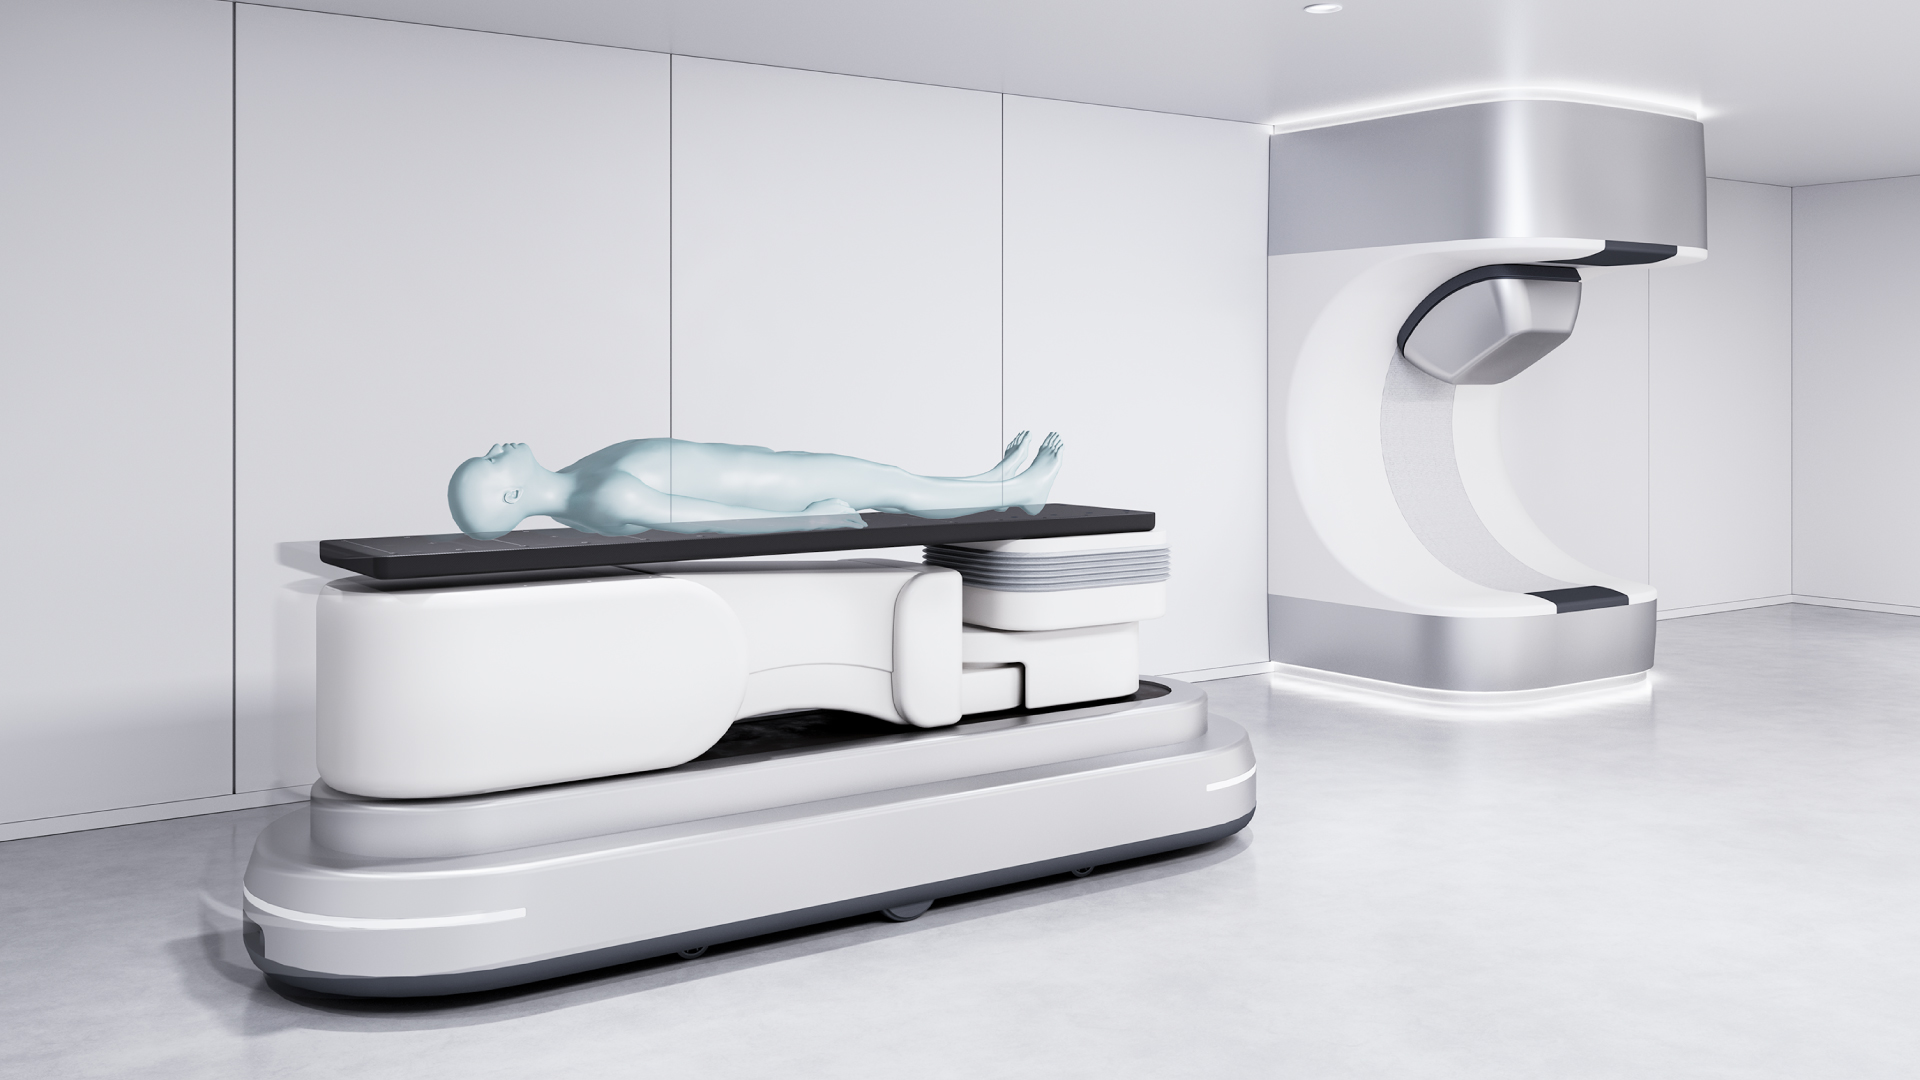 Proton Therapy System